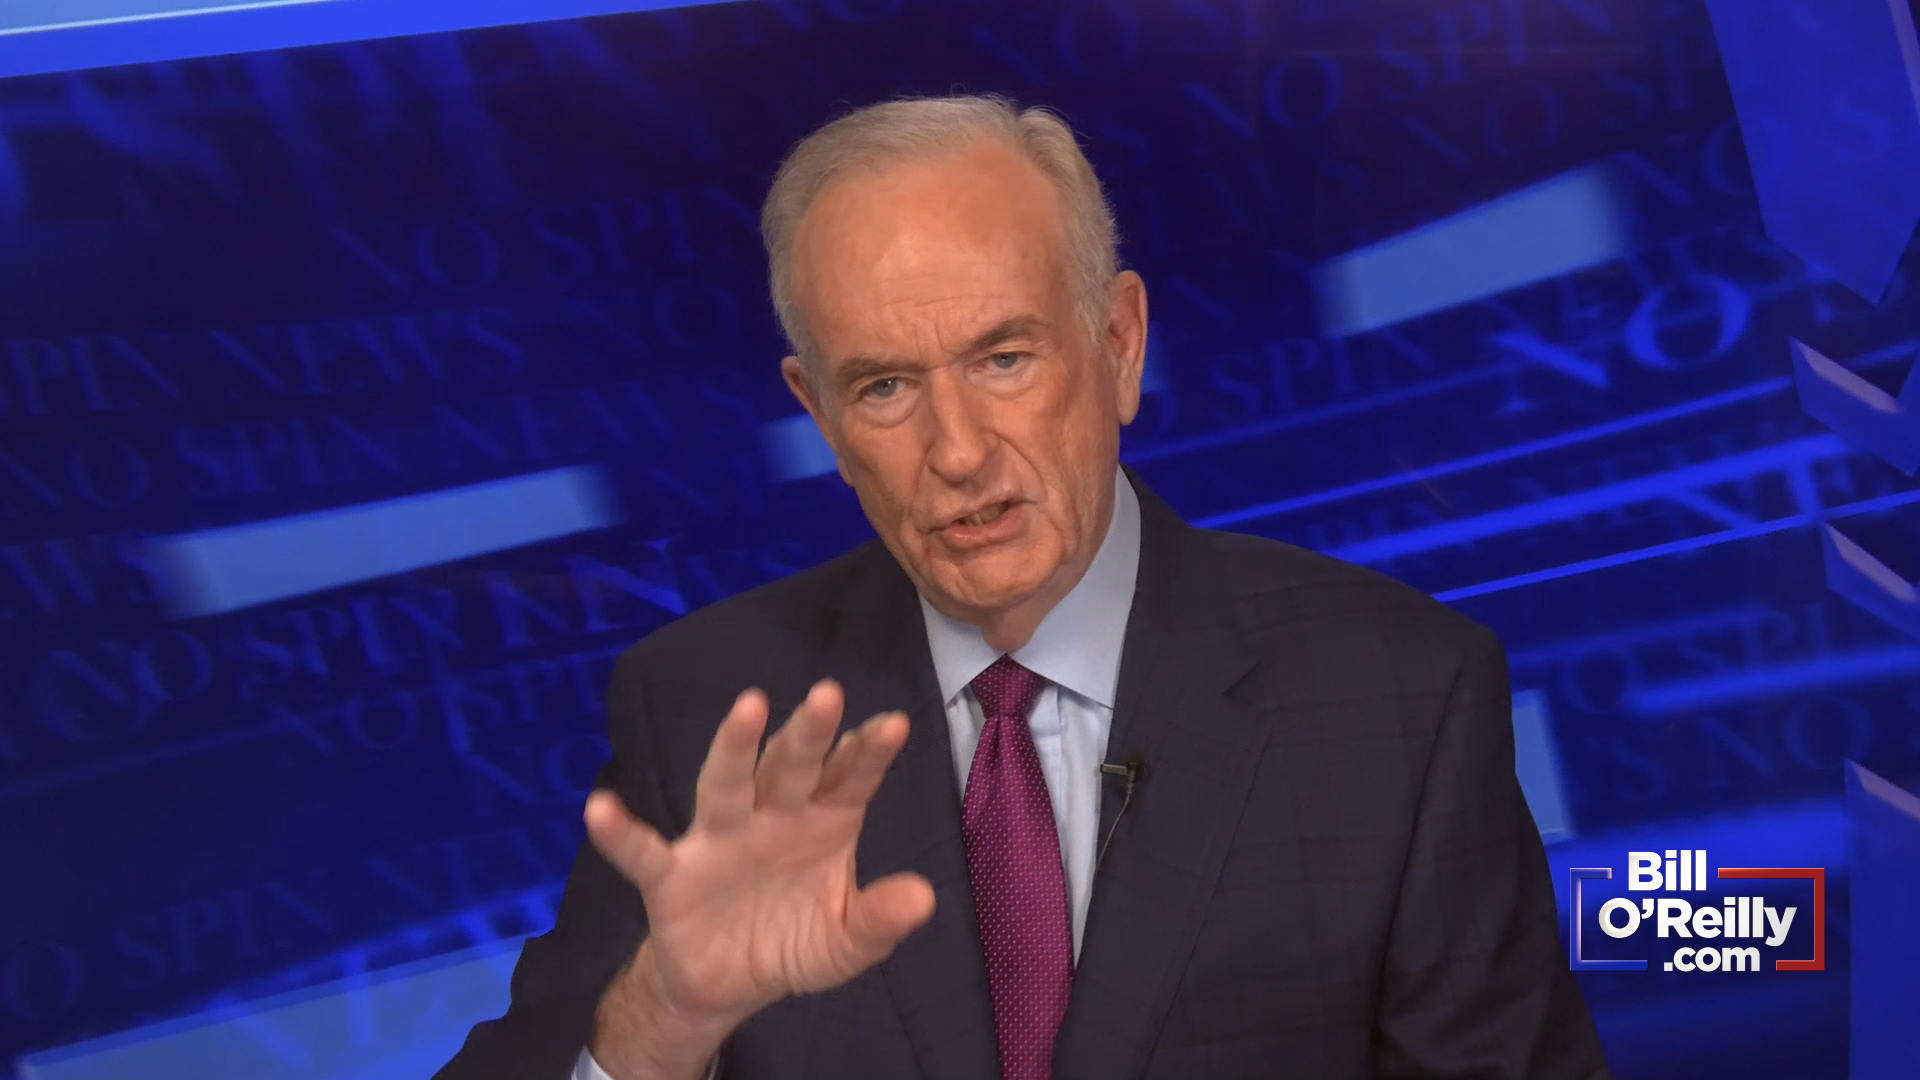 O'Reilly: 'The Dodgers Are Spitting in My Face!'